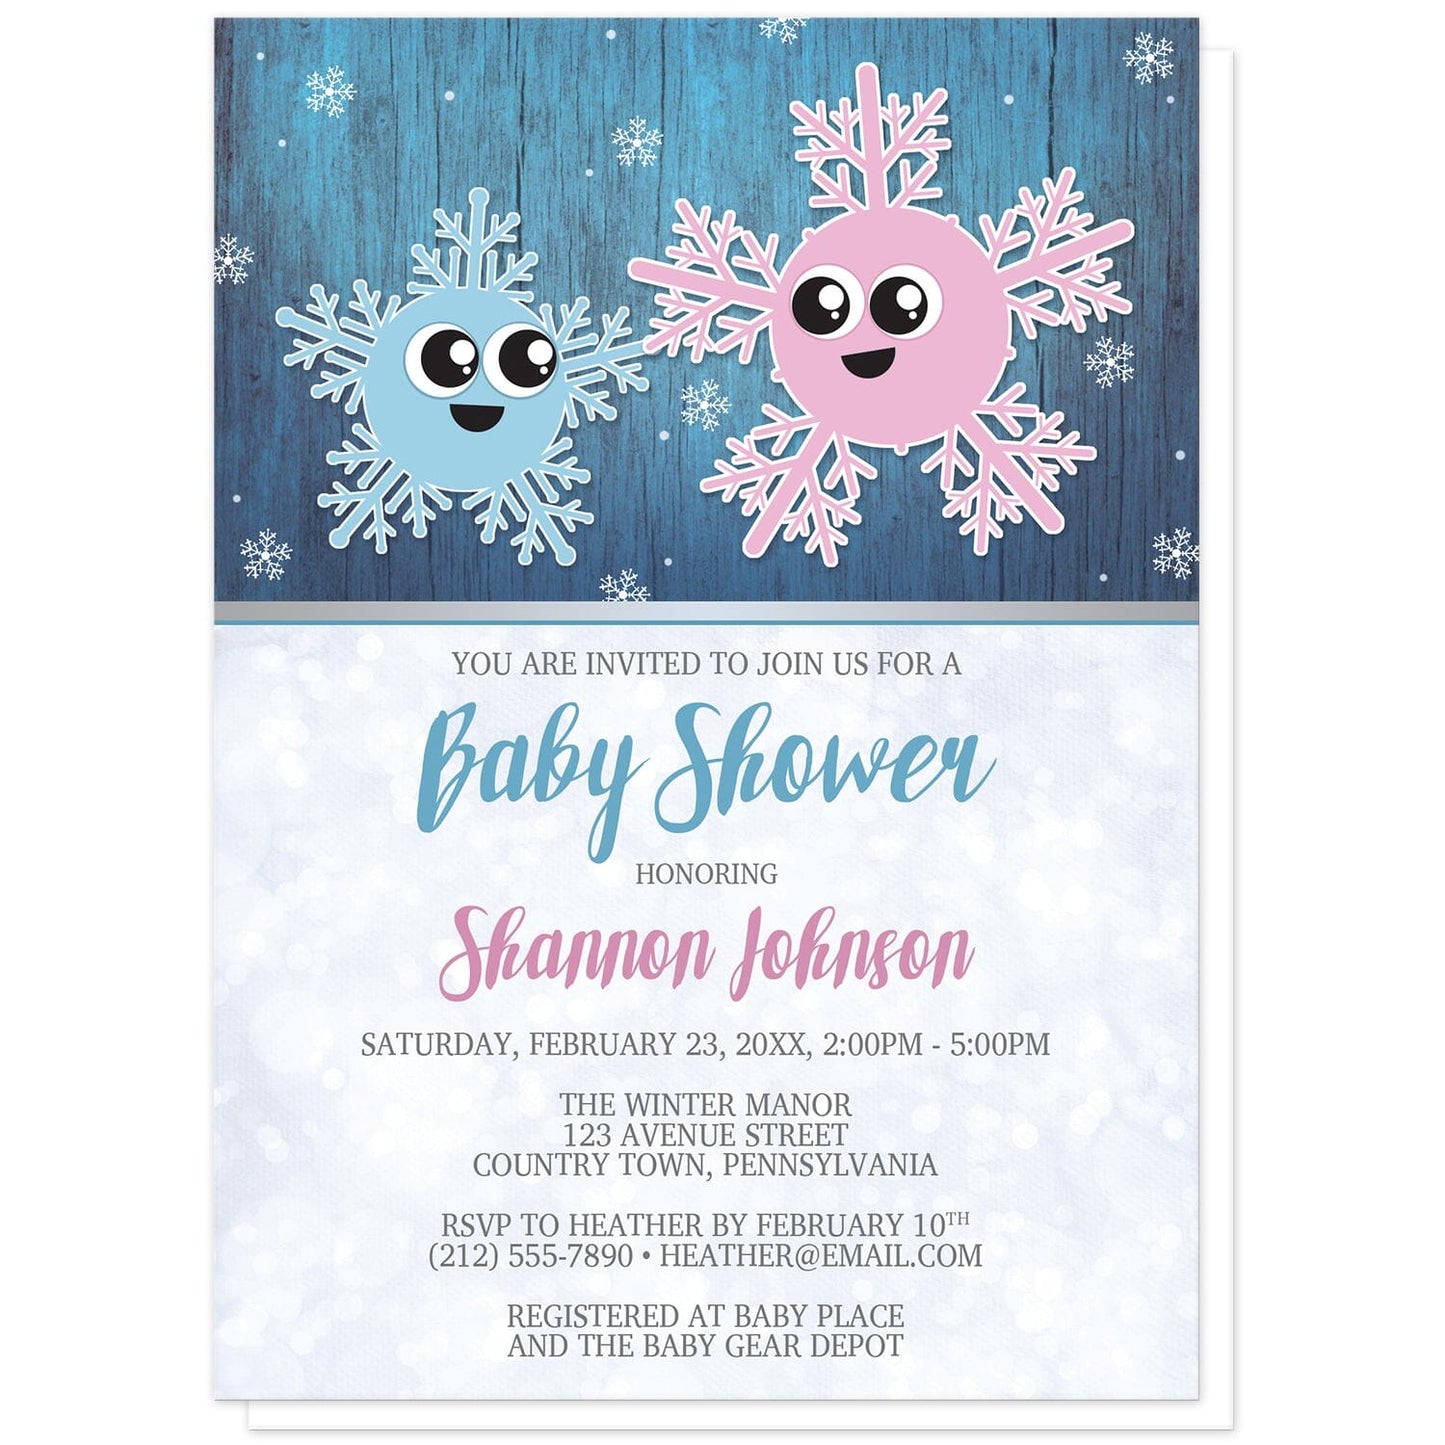 Cute Snowflake Rustic Winter Boy Baby Shower Invitations at Artistically Invited. Cute snowflake rustic winter boy baby shower invitations with an adorable illustration of little boy baby snowflake with his pink mommy snowflake. They are displayed over a dark blue background with a wood grain overlay, and smaller white snowflakes floating down. 